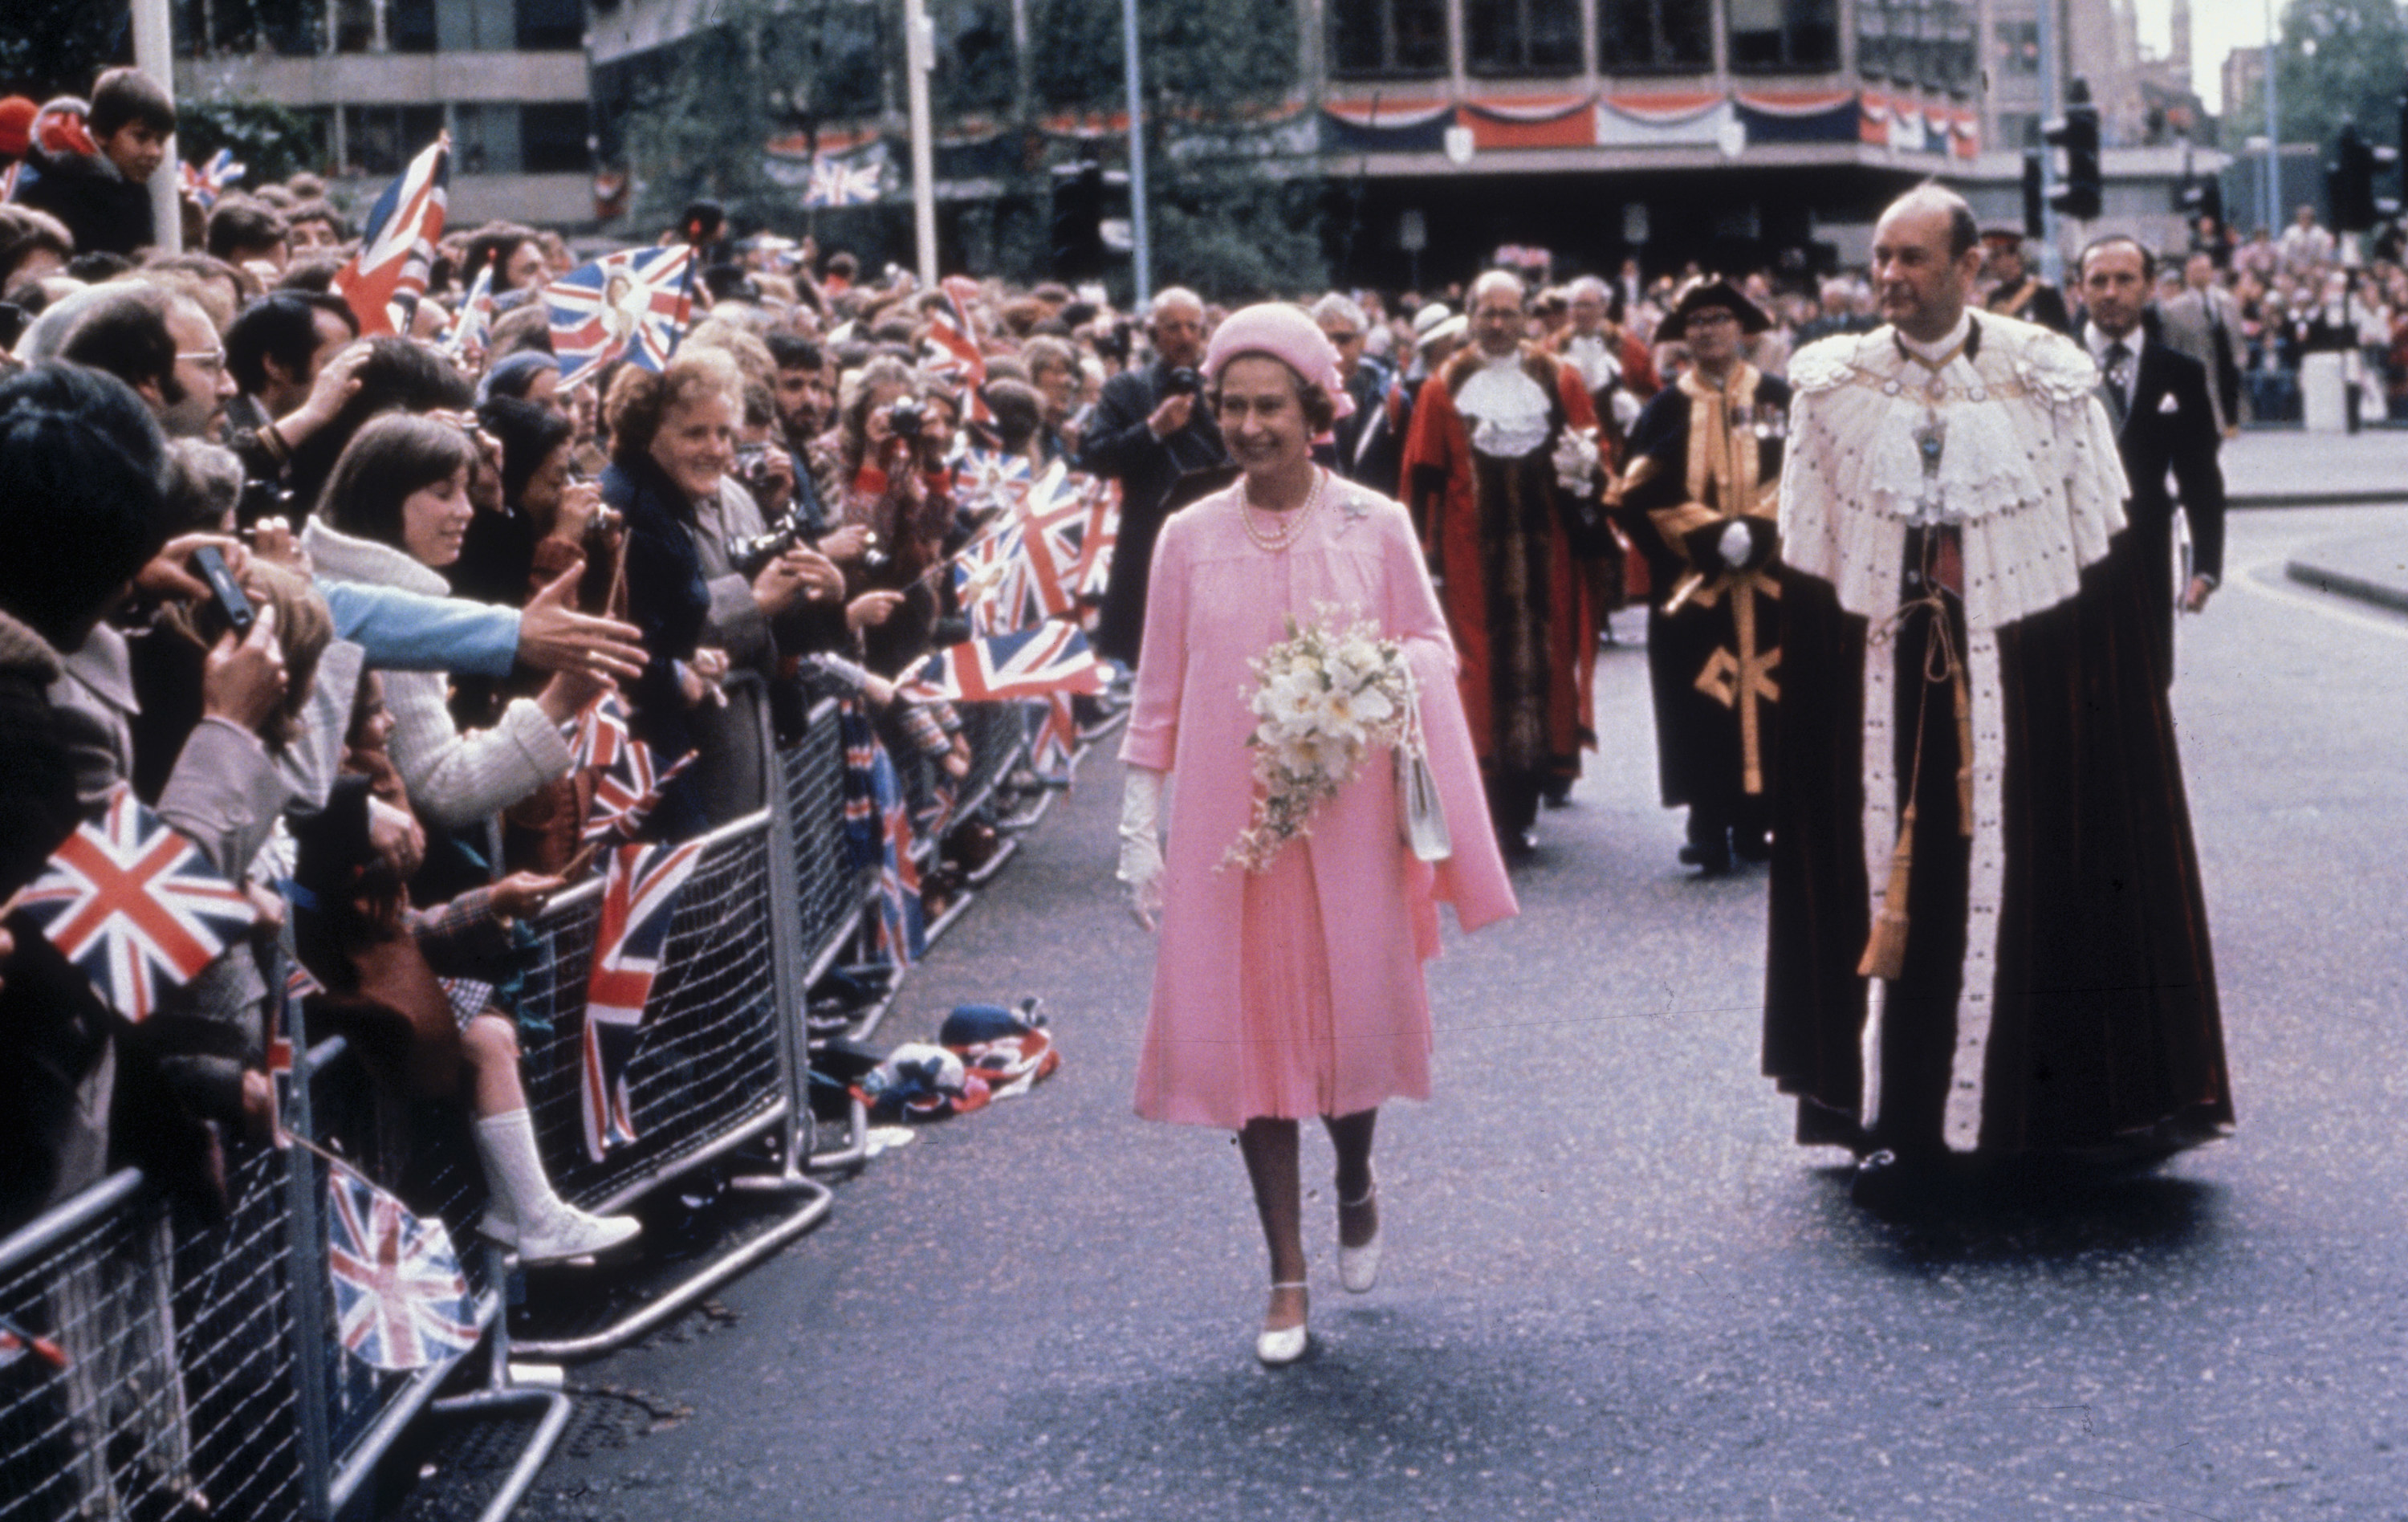 Queen Elizabeth II walking by and surrounded by fans